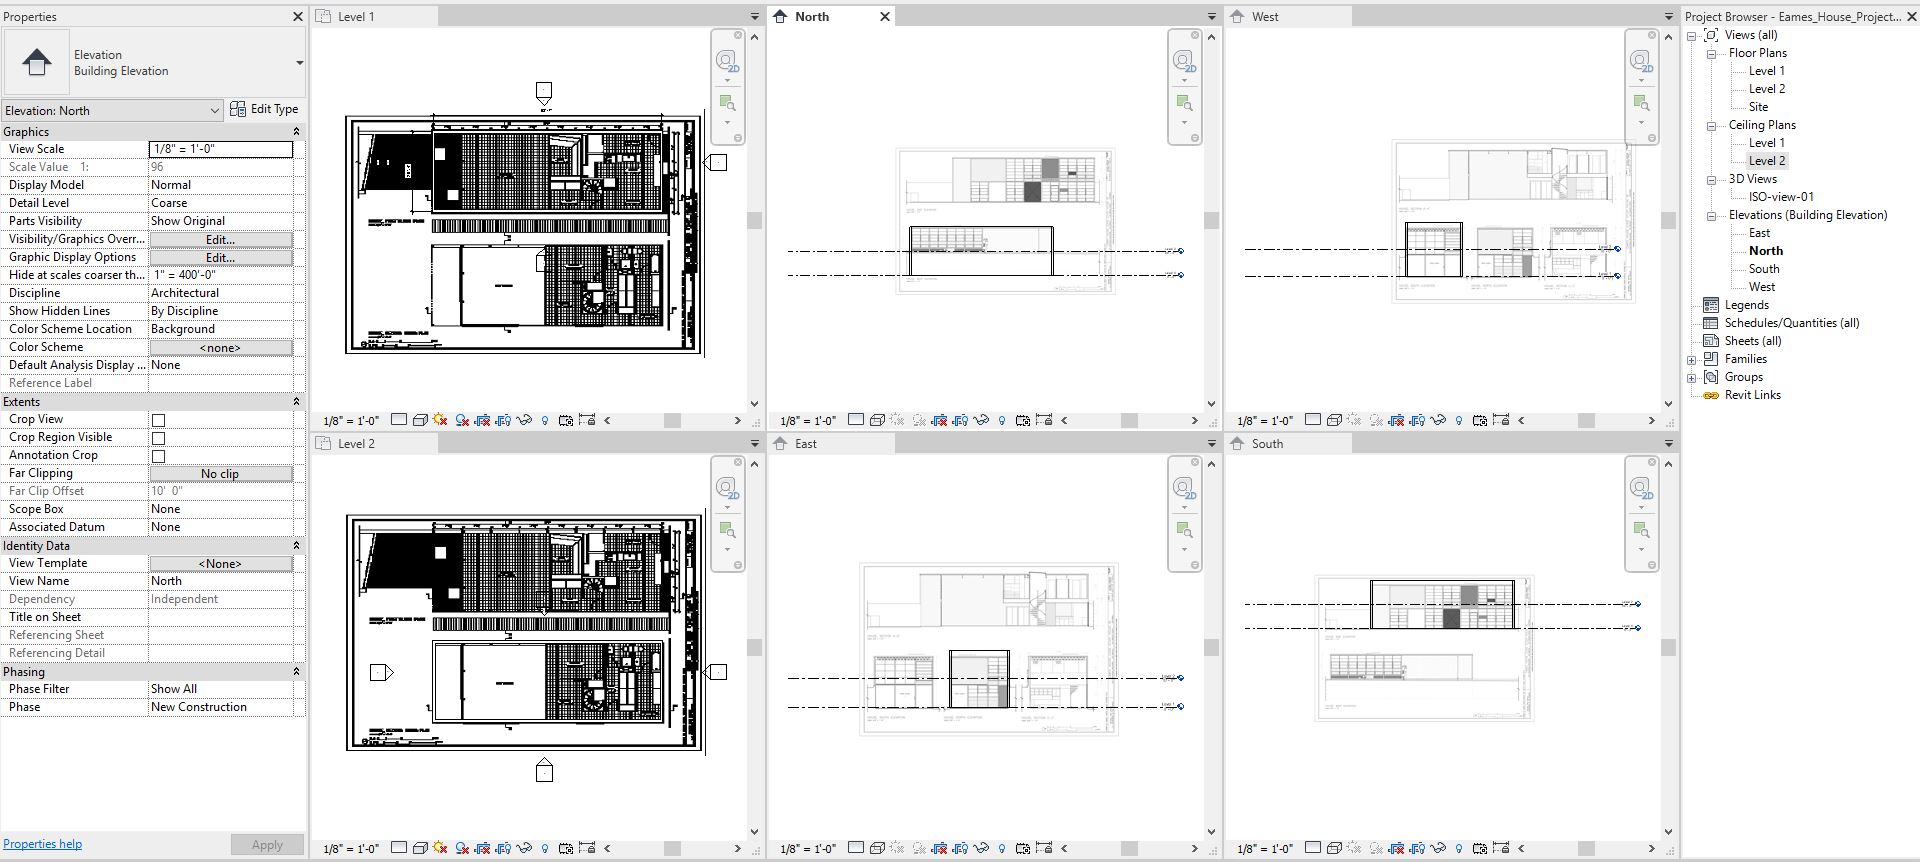 This image shows the import drawings for all views.